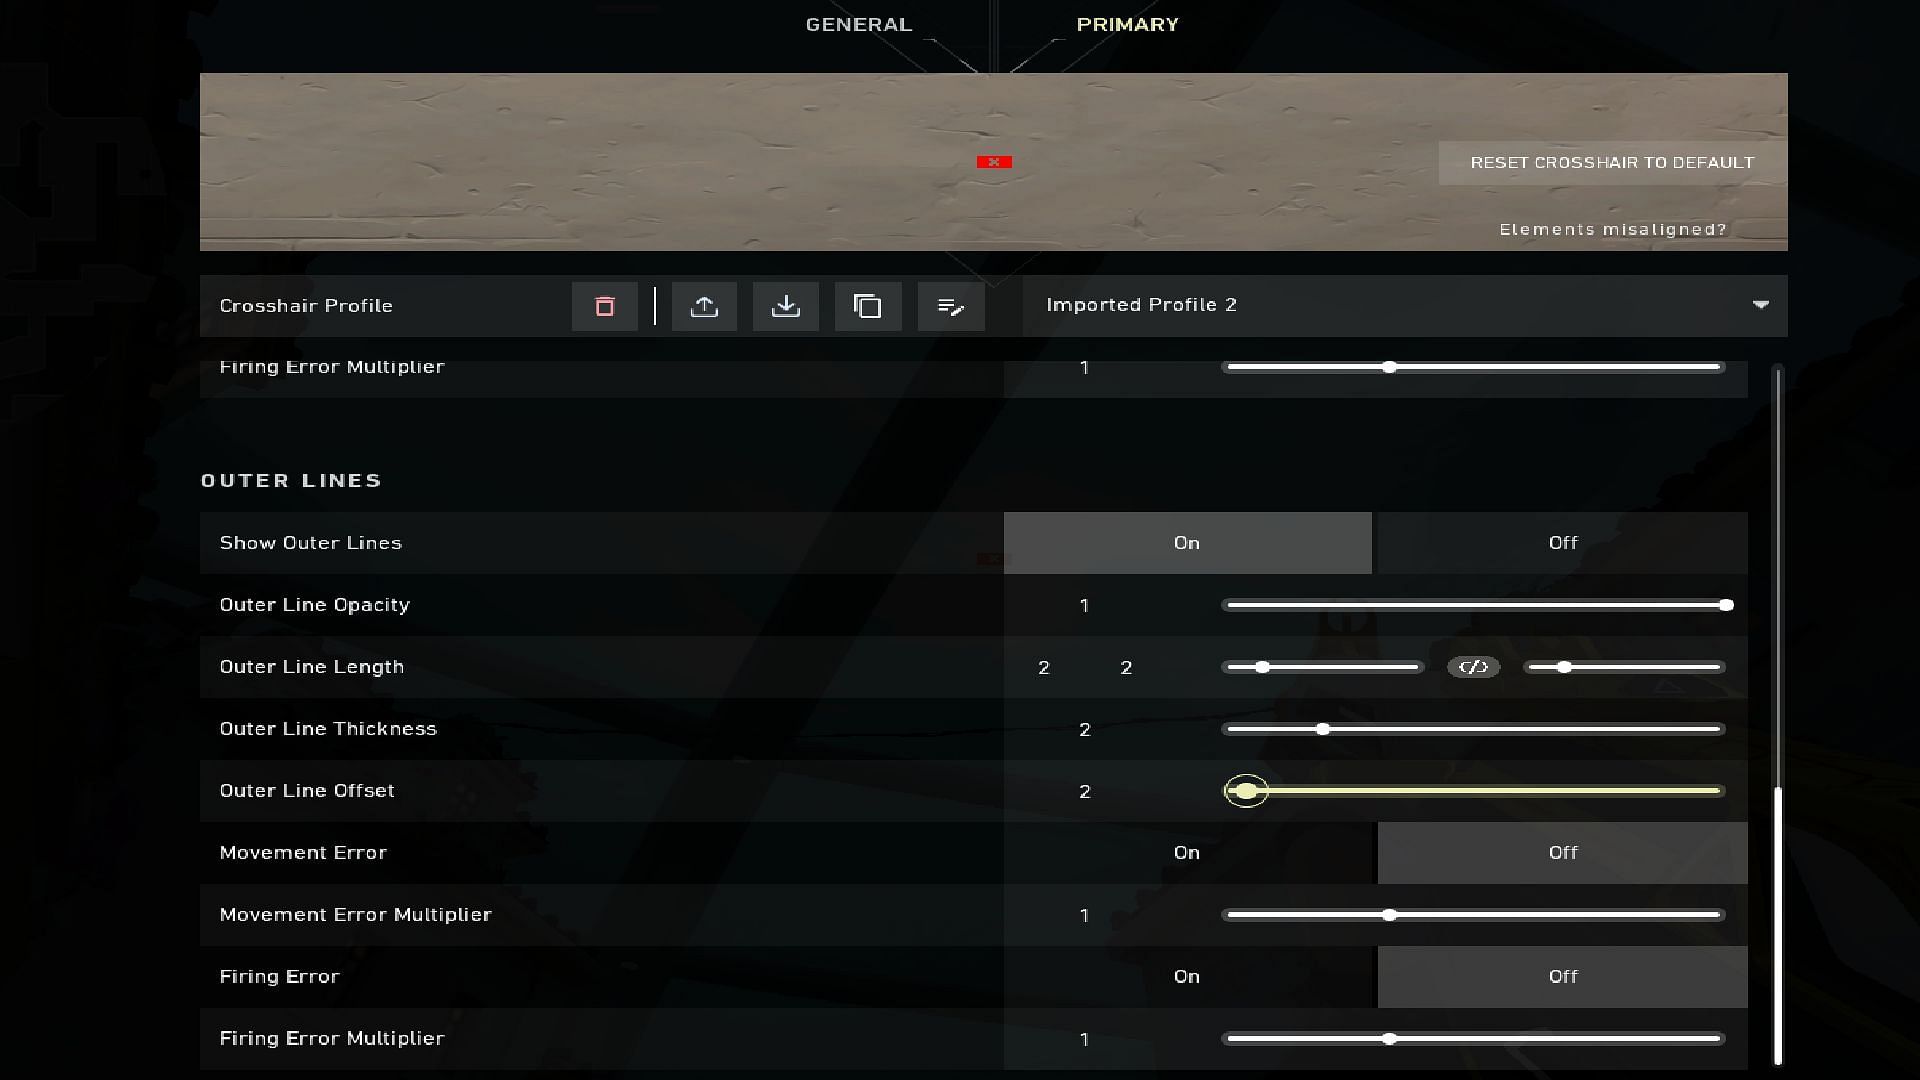 Outer Lines Crosshair settings (Imag via Riot Games)